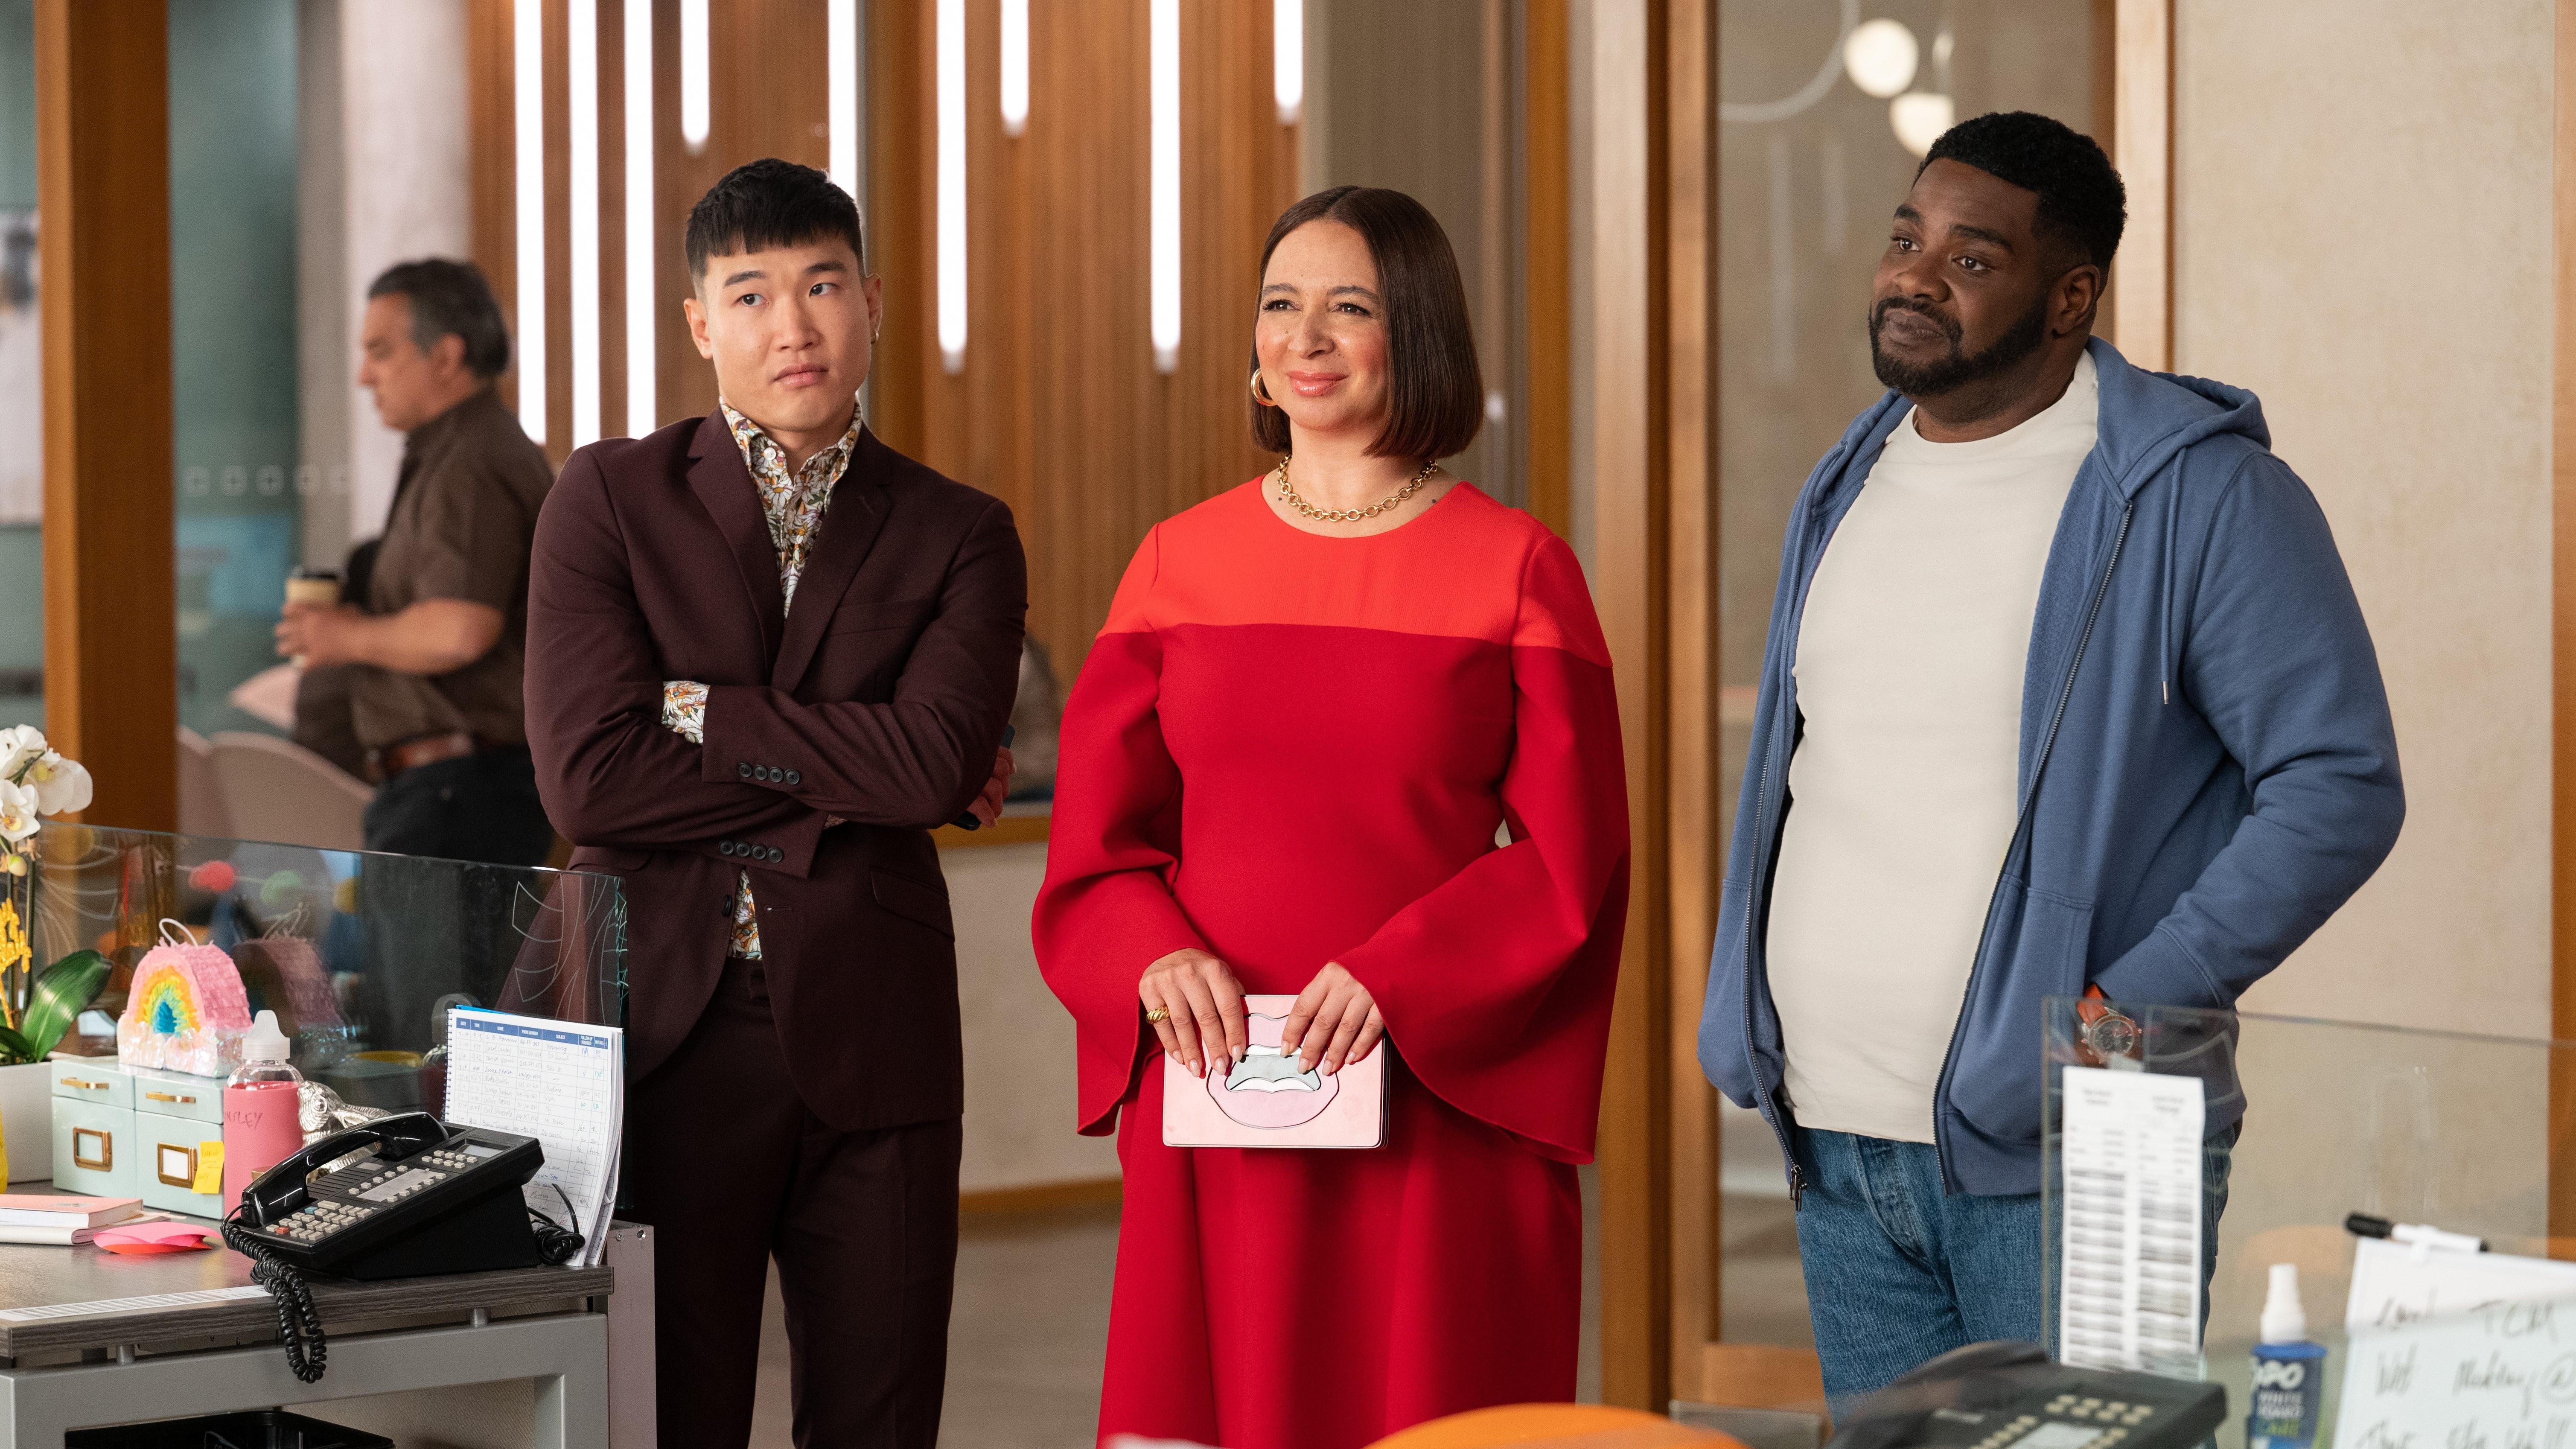 Apple TV Plus offers a first look at Maya Rudolph’s new series Loot